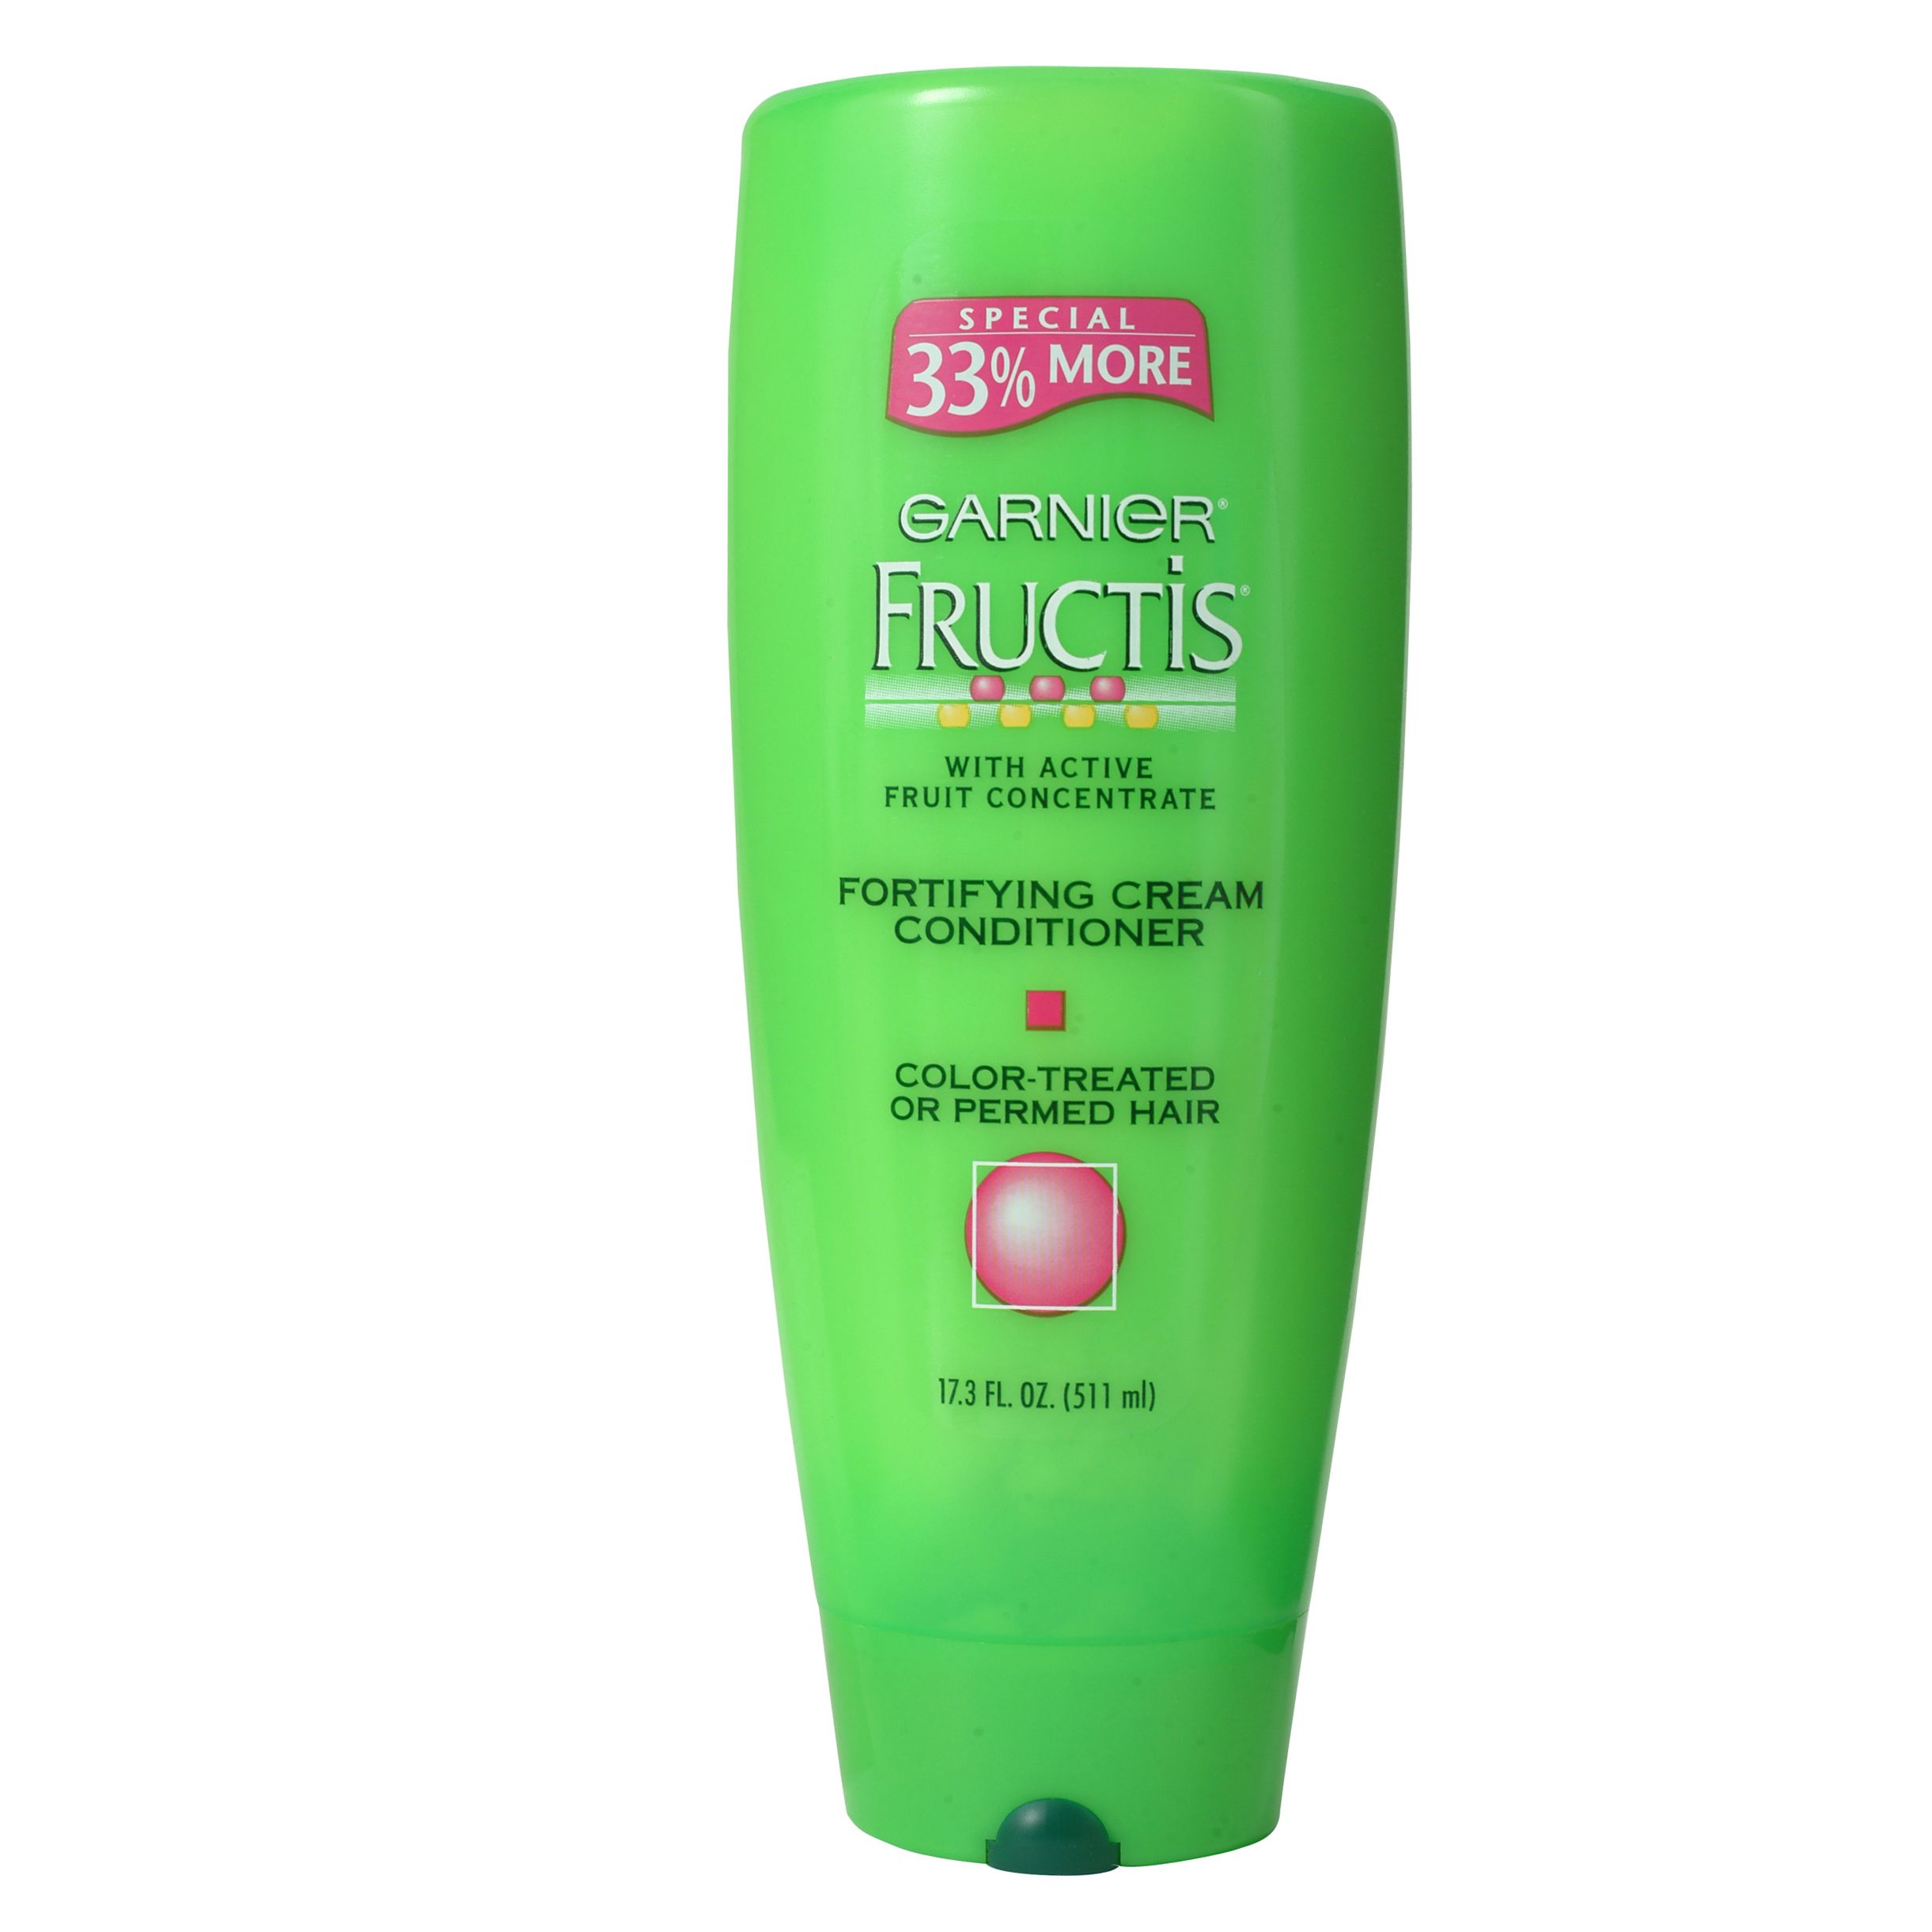 Garnier Fructis Fortifying Cream Conditioner For Permed/Color Treated Hair 13 Fluid Ounce Bottle